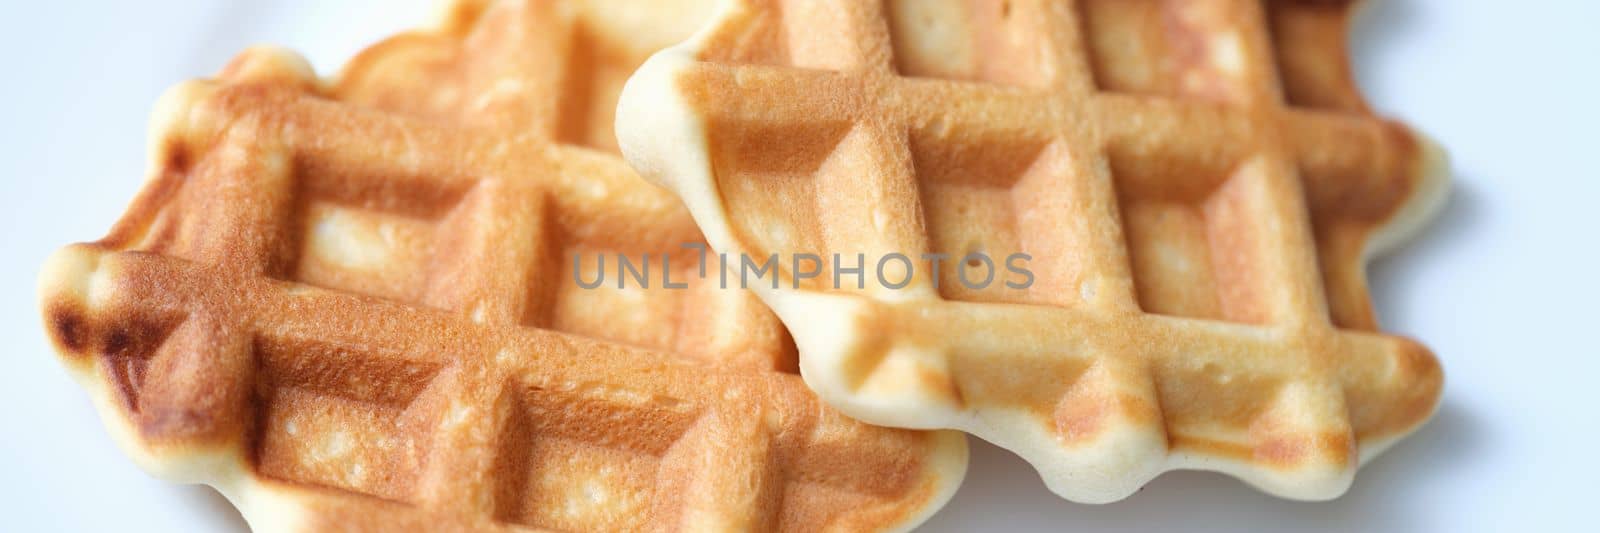 Two freshly baked Belgian waffles on white plate by kuprevich